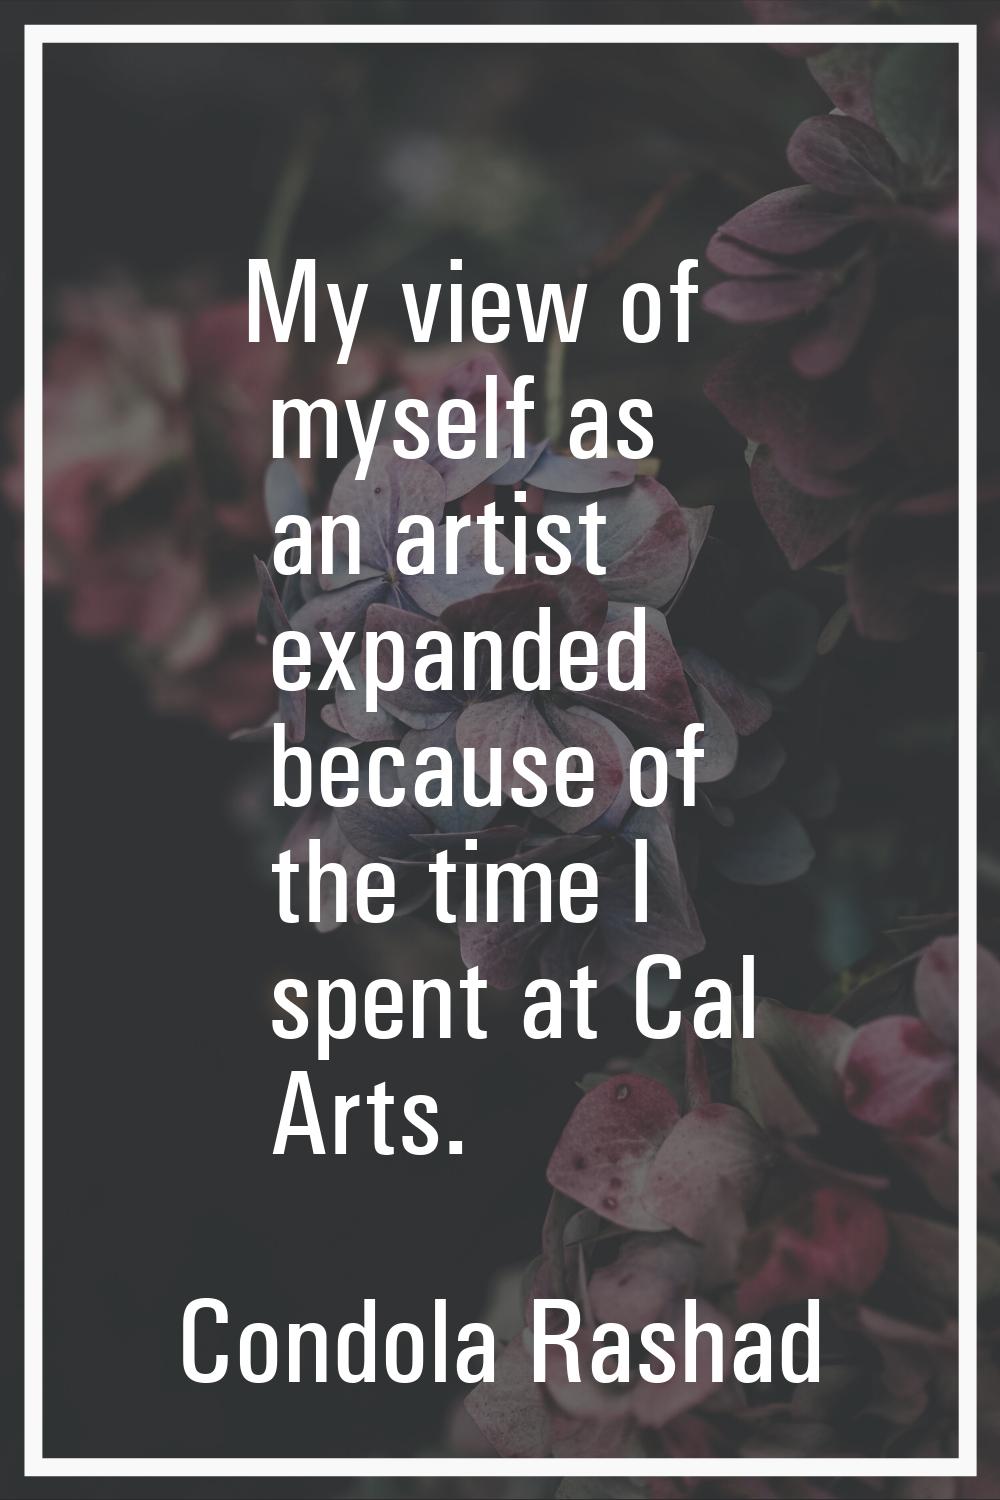 My view of myself as an artist expanded because of the time I spent at Cal Arts.